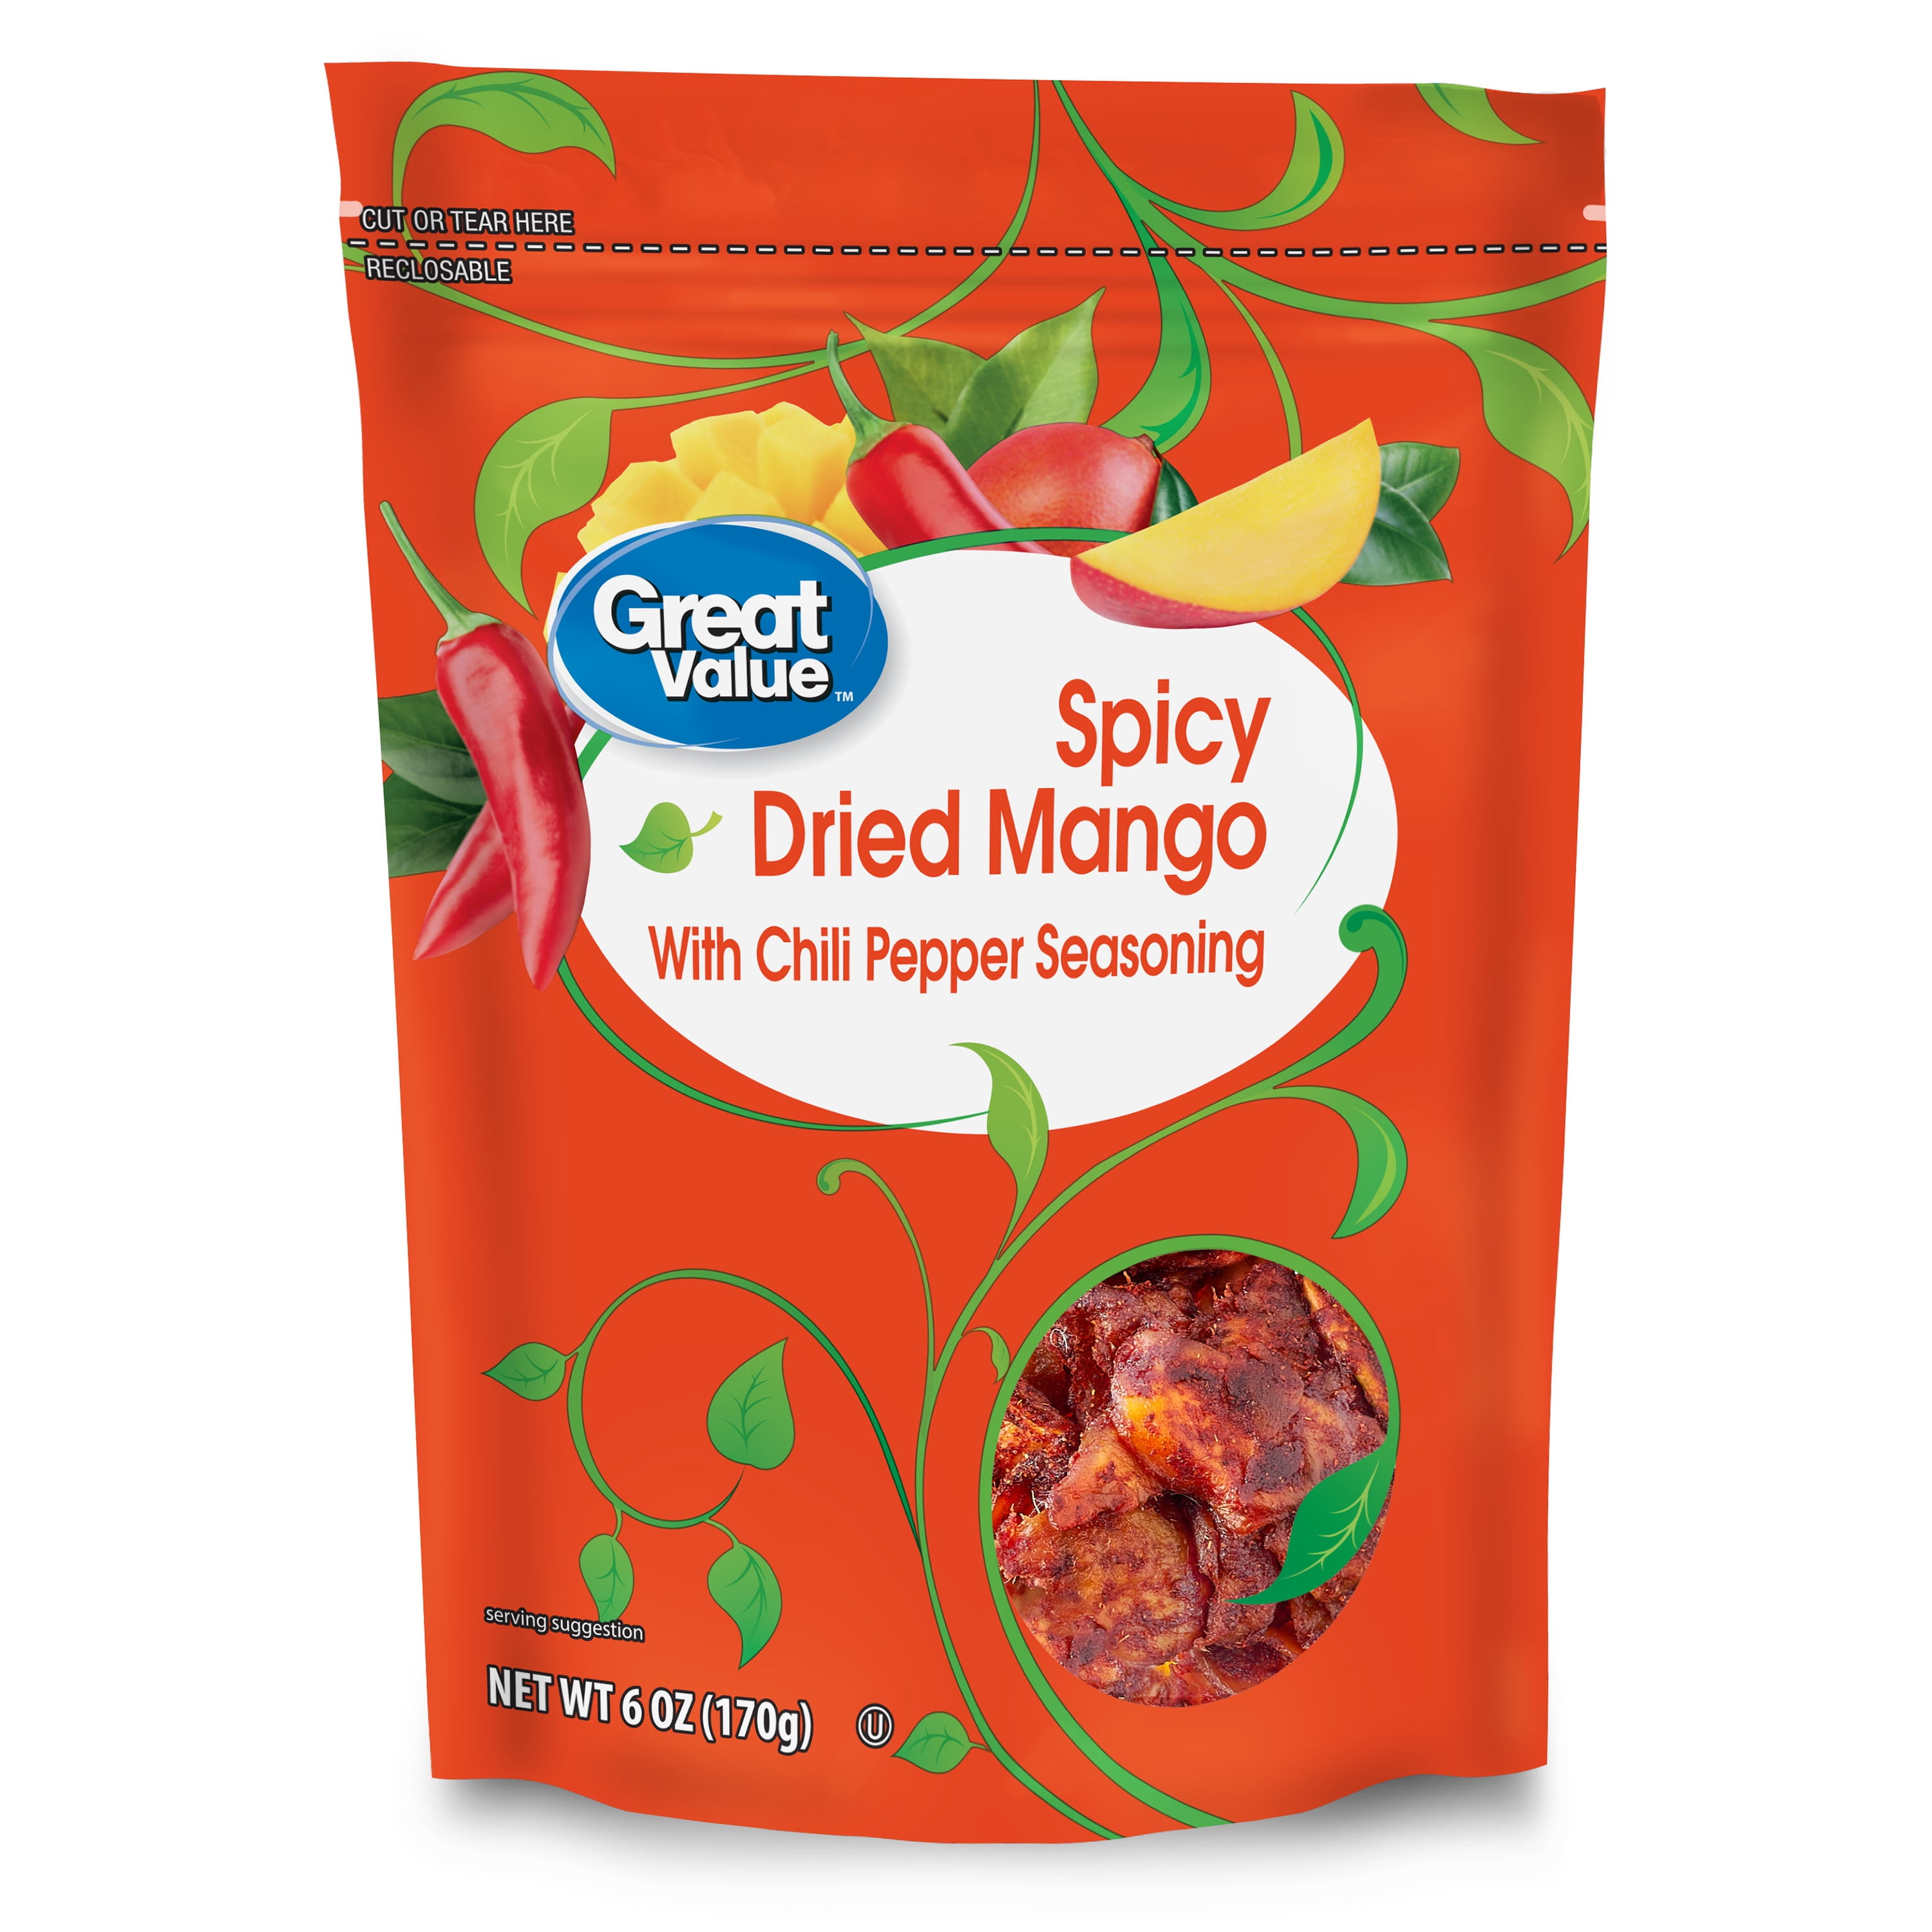 Spicy Dried Mango with Chili Pepper Seasoning